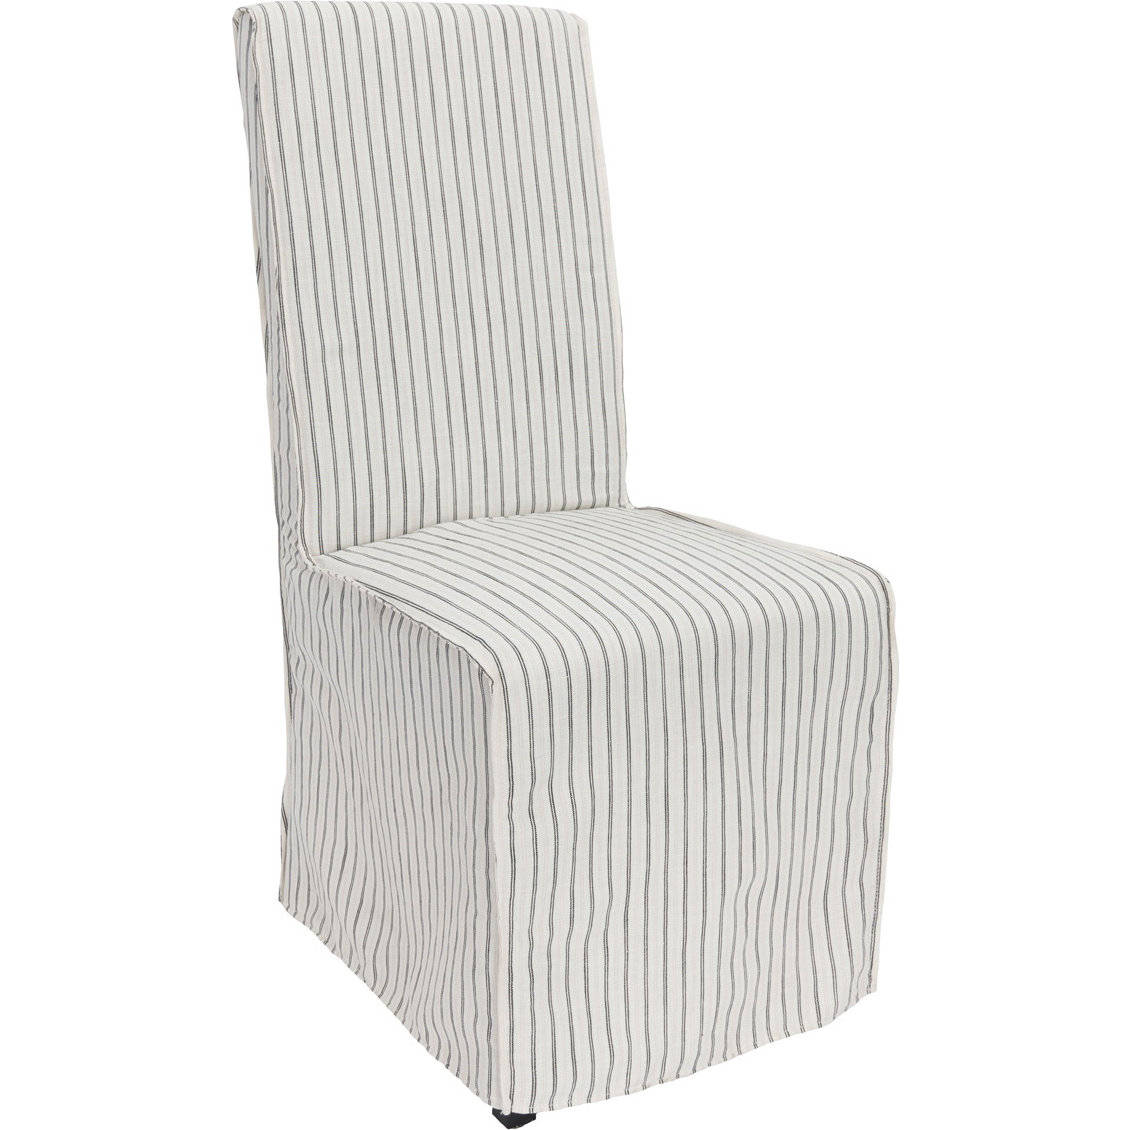 53051212 Arianna Dining Chair, Grey And White Striped Dining Chair